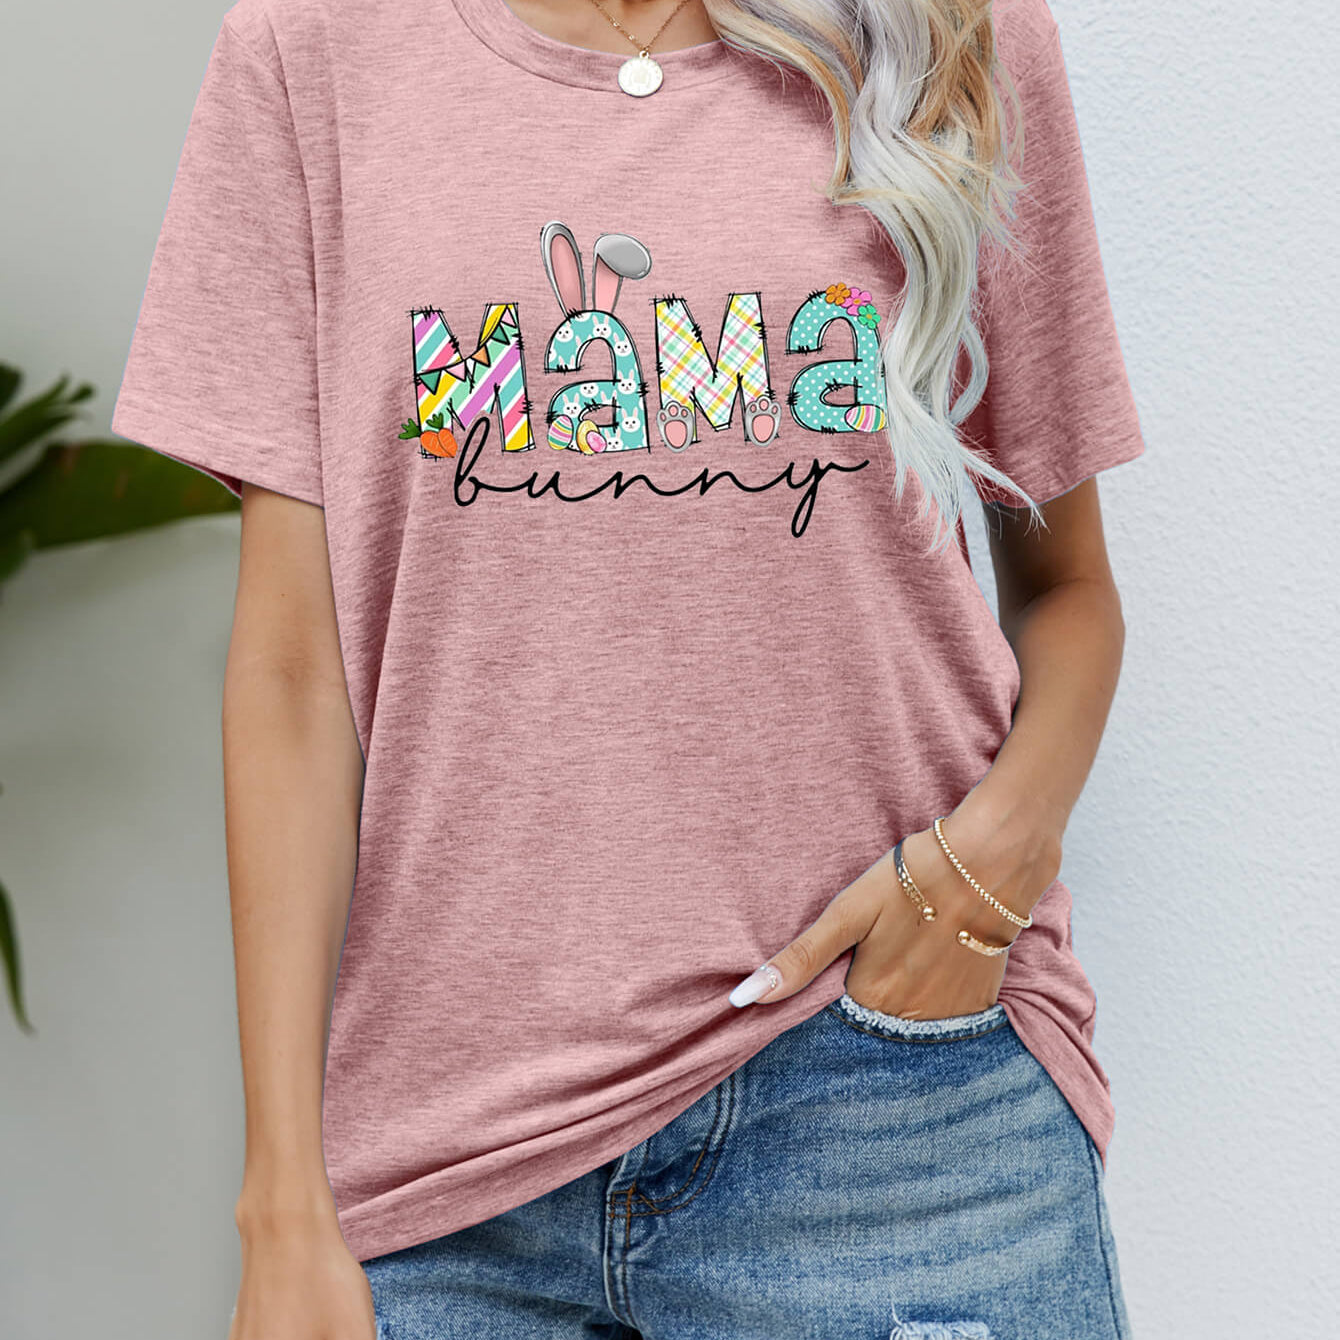 "MAMA BUNNY Easter Graphic Tee - Embrace Love and Joy this Easter Season with our Soft and Sweet Design - Wrap Yourself in Comfortable Elegance" - Guy Christopher